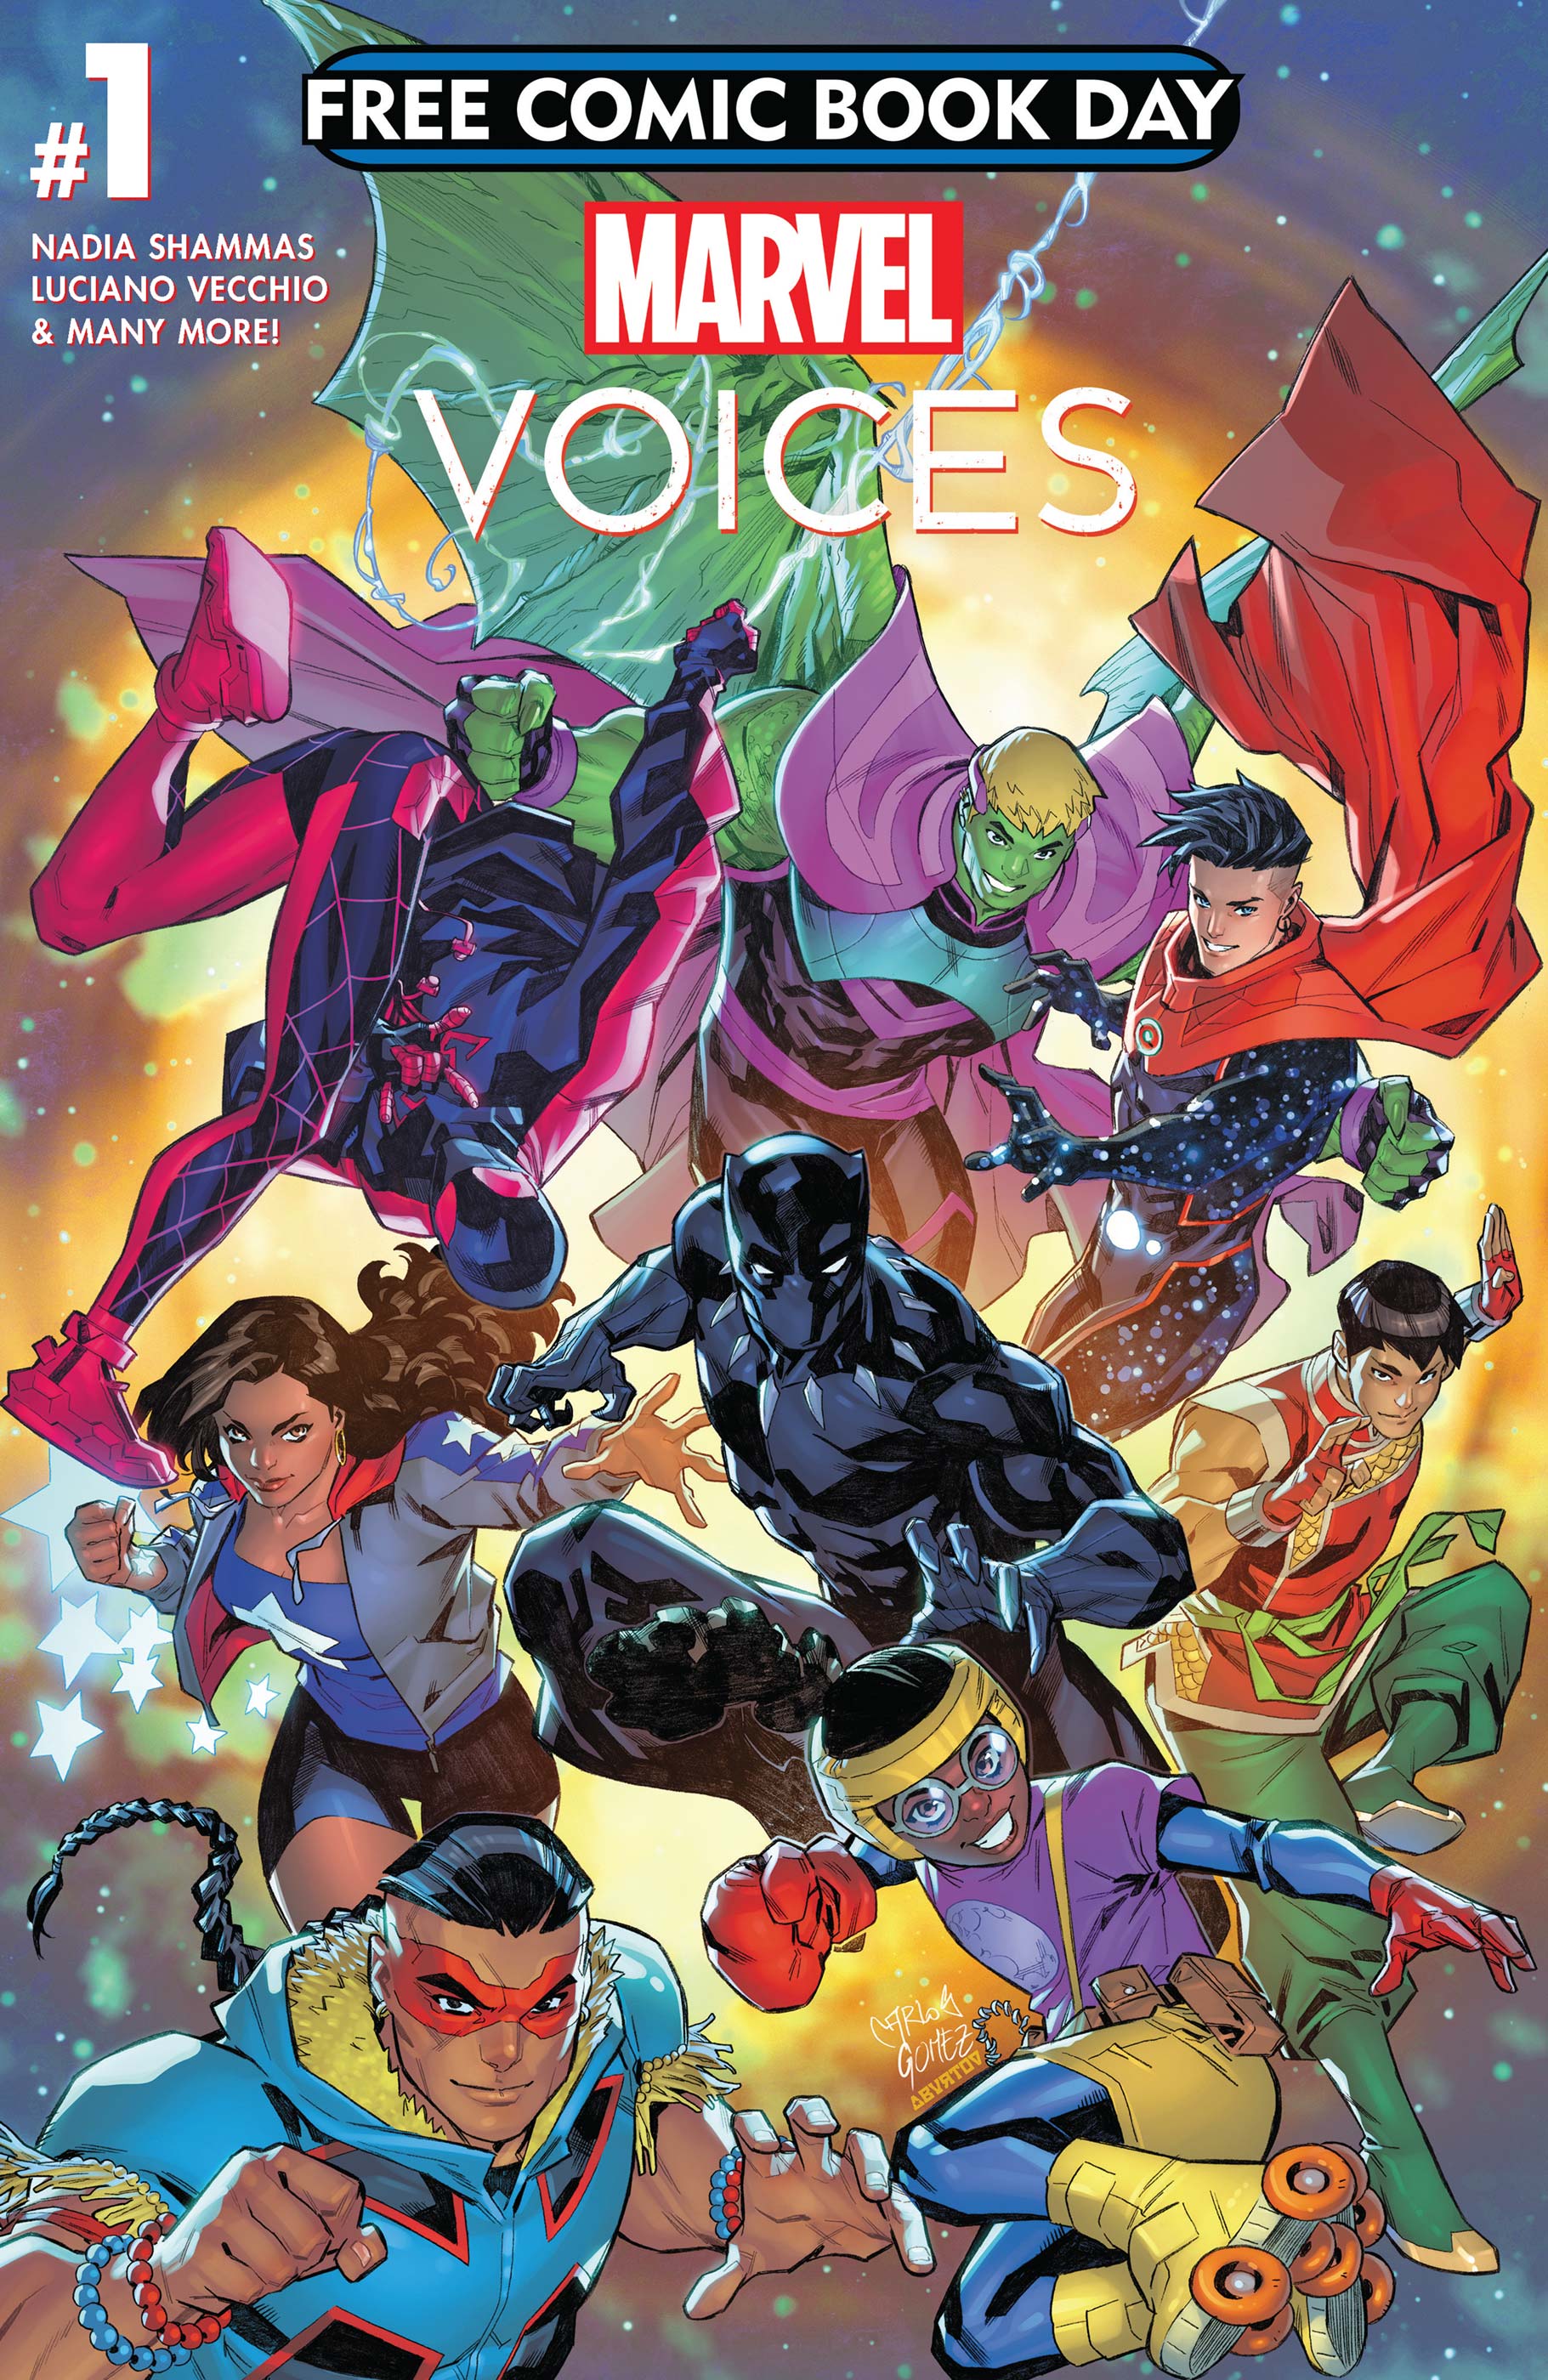 Free Comic Book Day 2022: Marvel's Voices (2022) #1